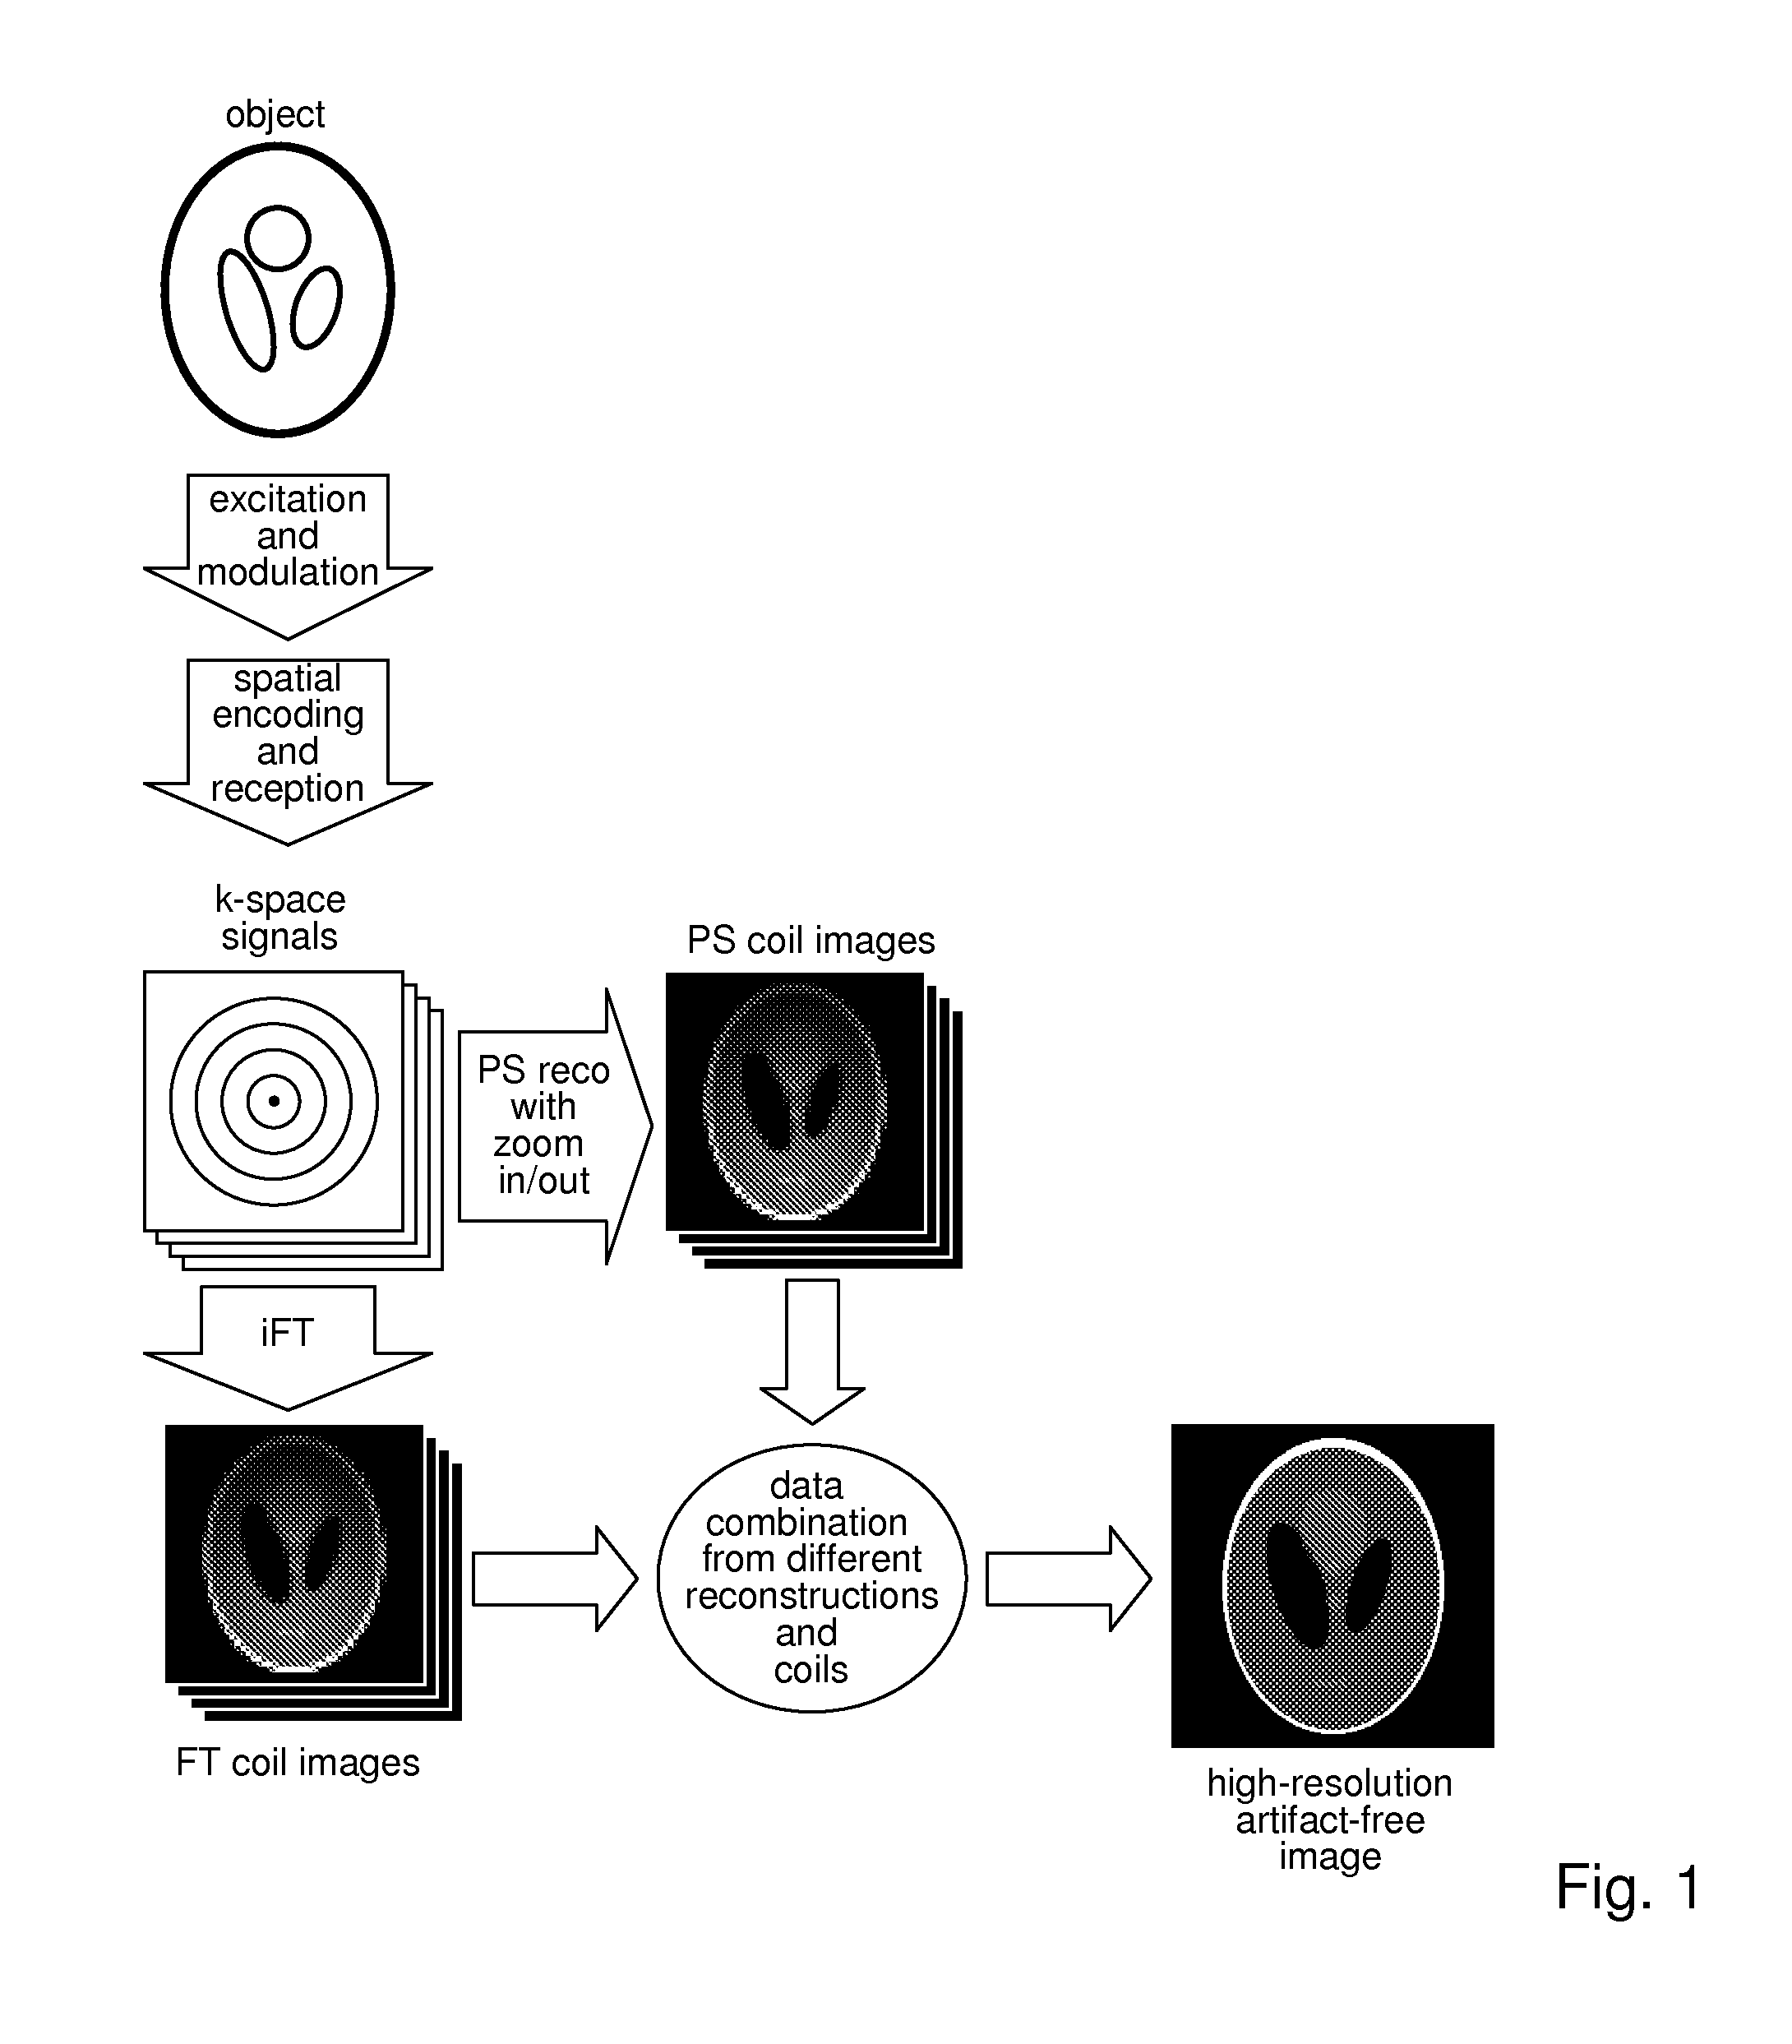 Method for data acquisition acceleration in magnetic resonance imaging (MRI) using receiver coil arrays and non-linear phase distributions